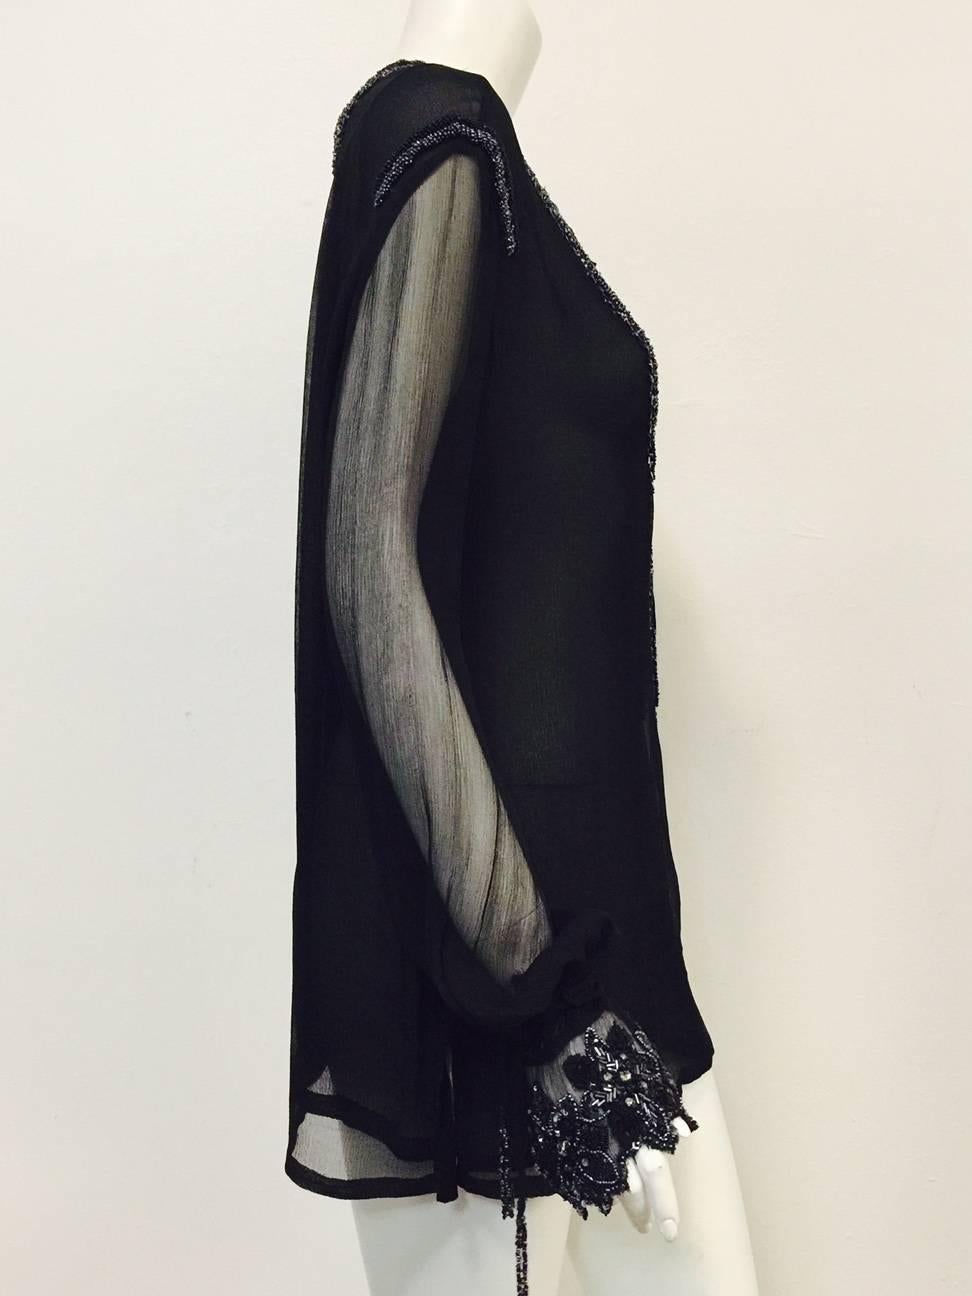 Just Cavalli Black Silk Tunic is sophisticated and chic with just the right amount of 